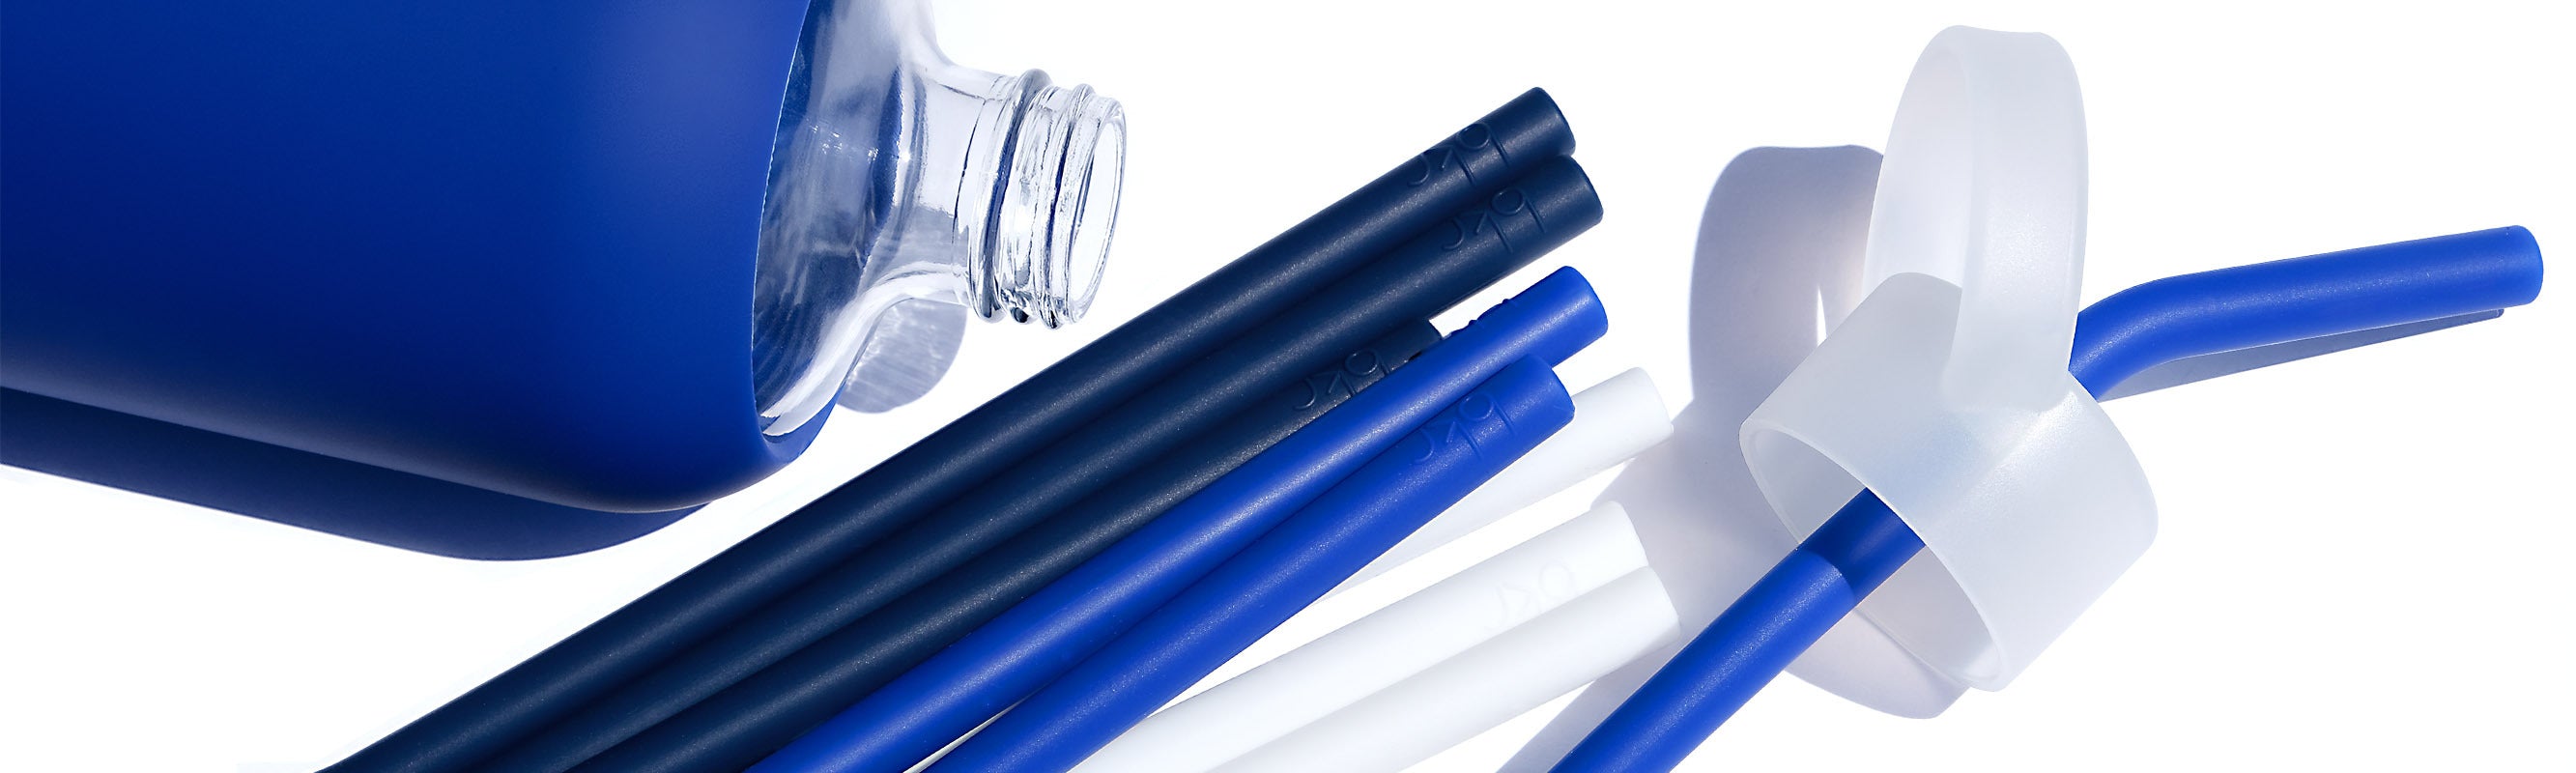 bkr glass and silicone water bottles with straw caps called Sip Kits